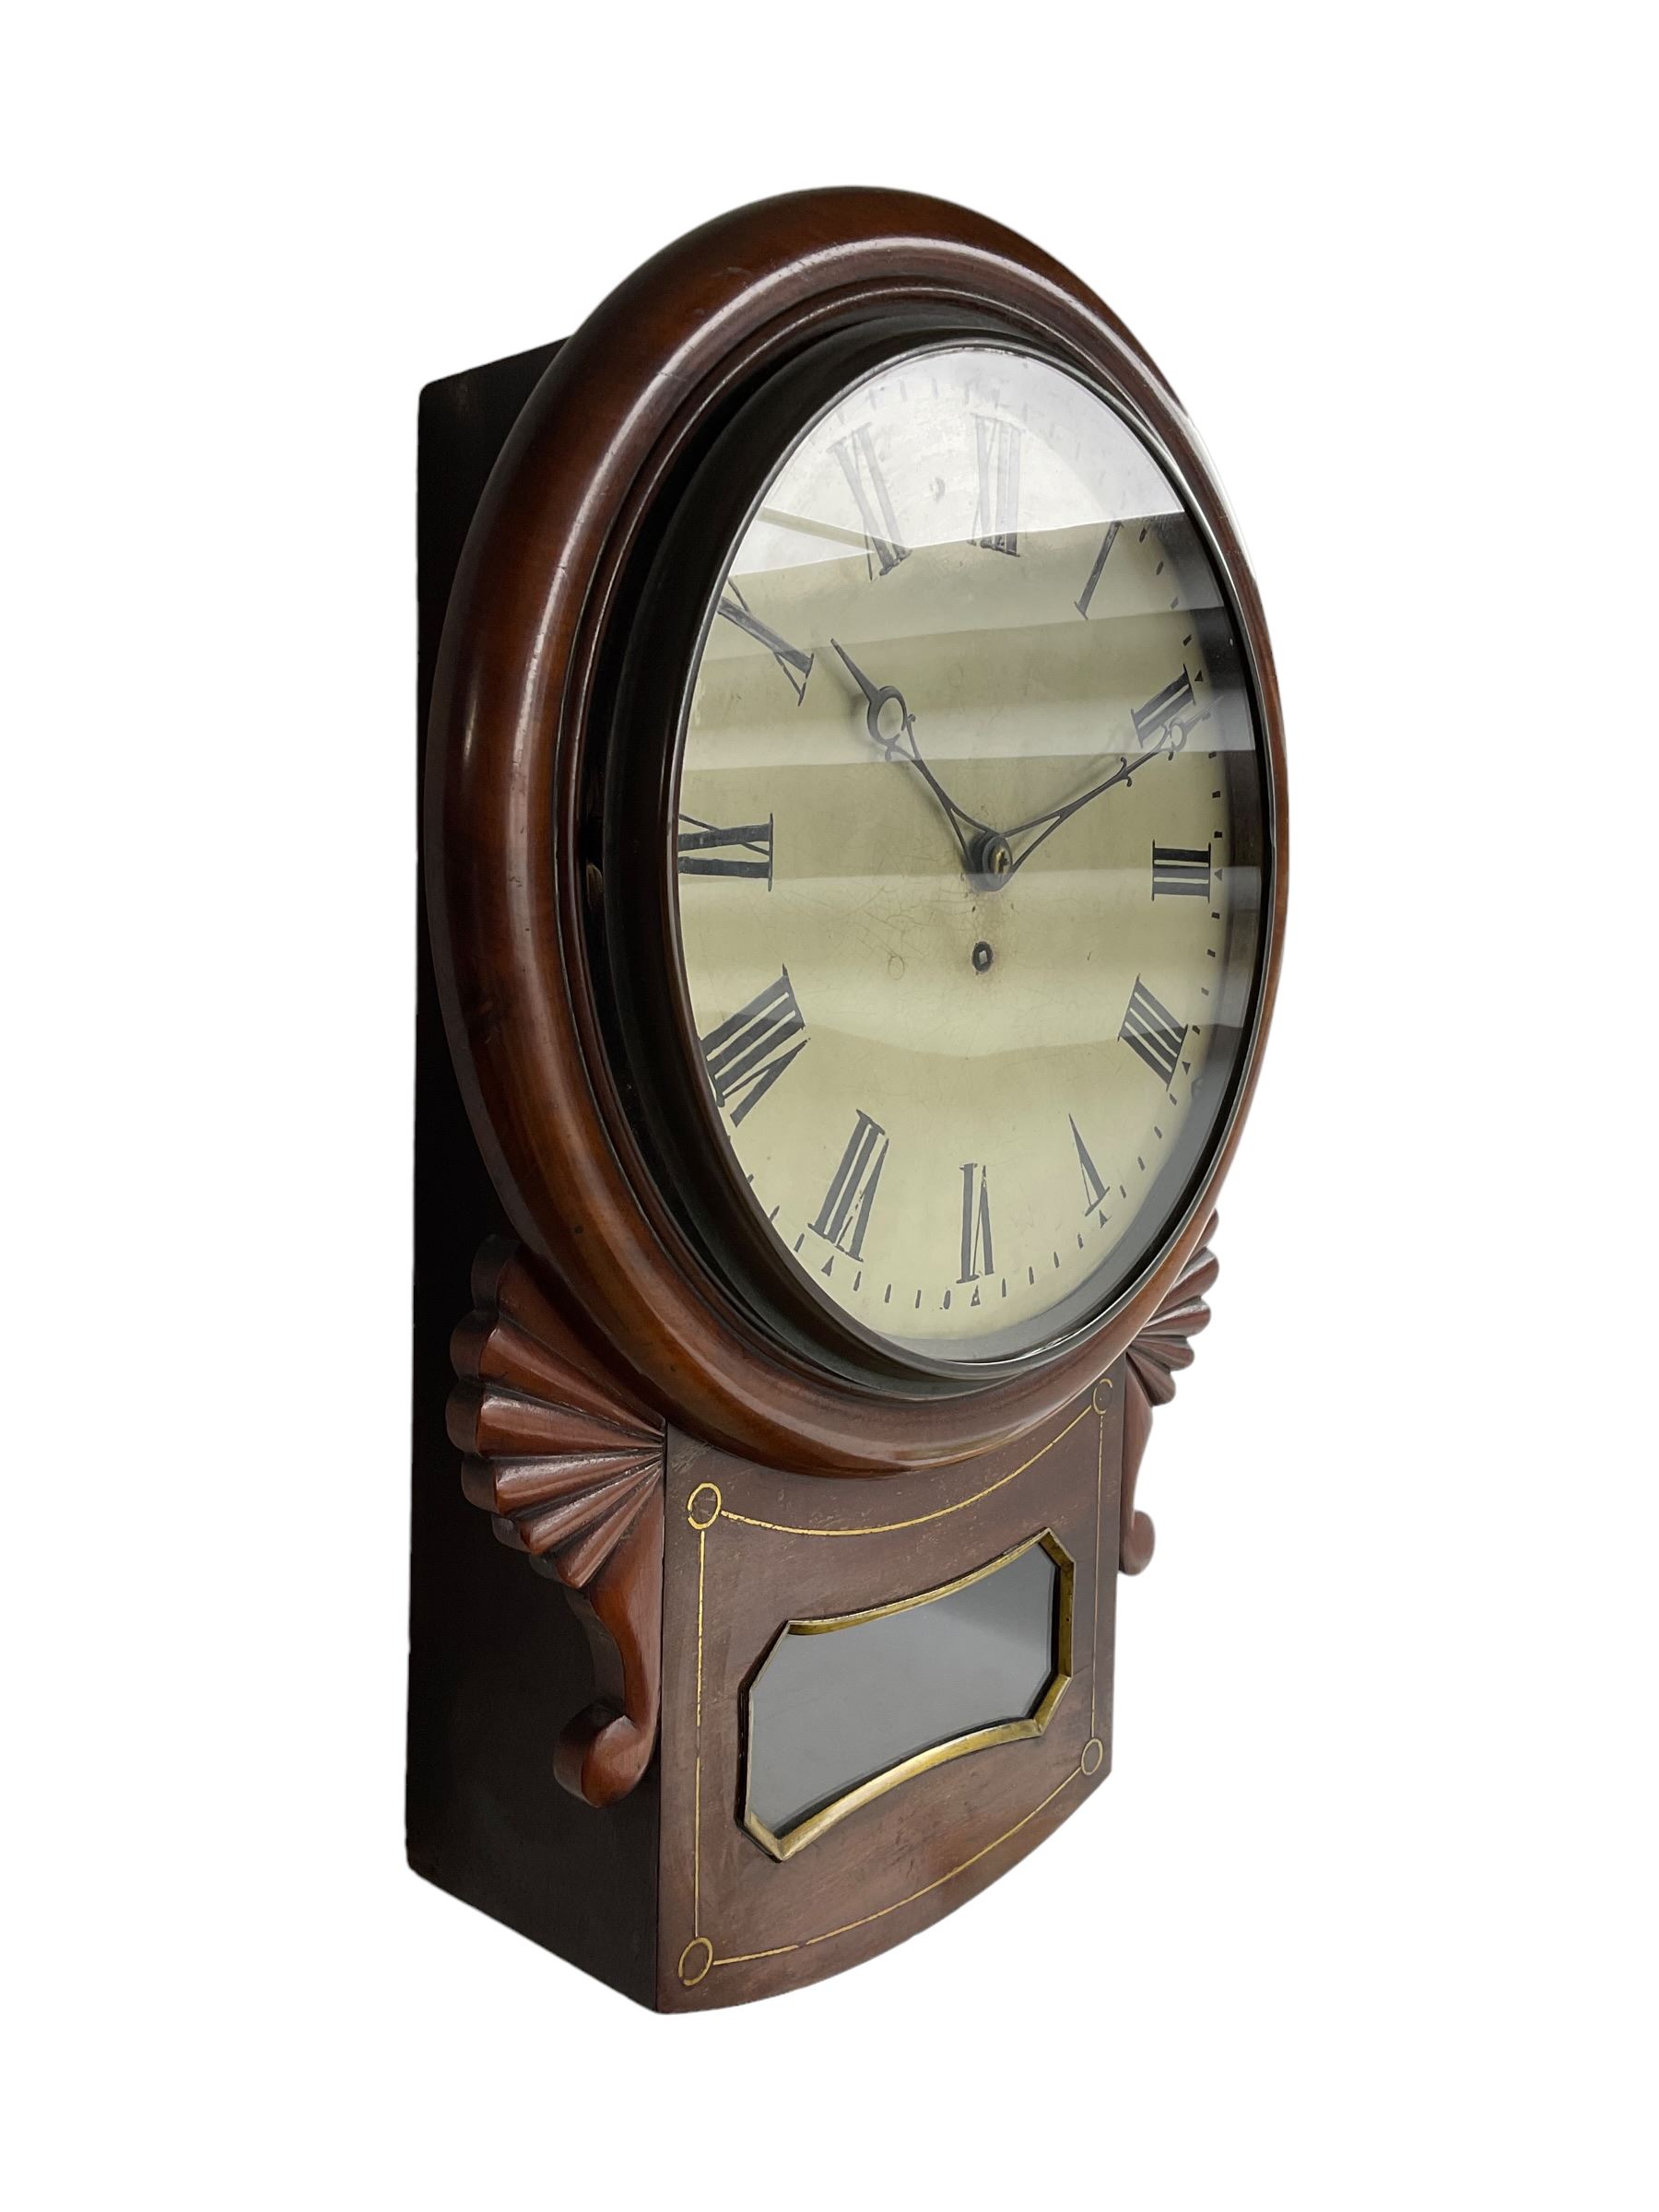 English - William IV drop dial 8-day fusee wall clock in a mahogany case - Image 2 of 4